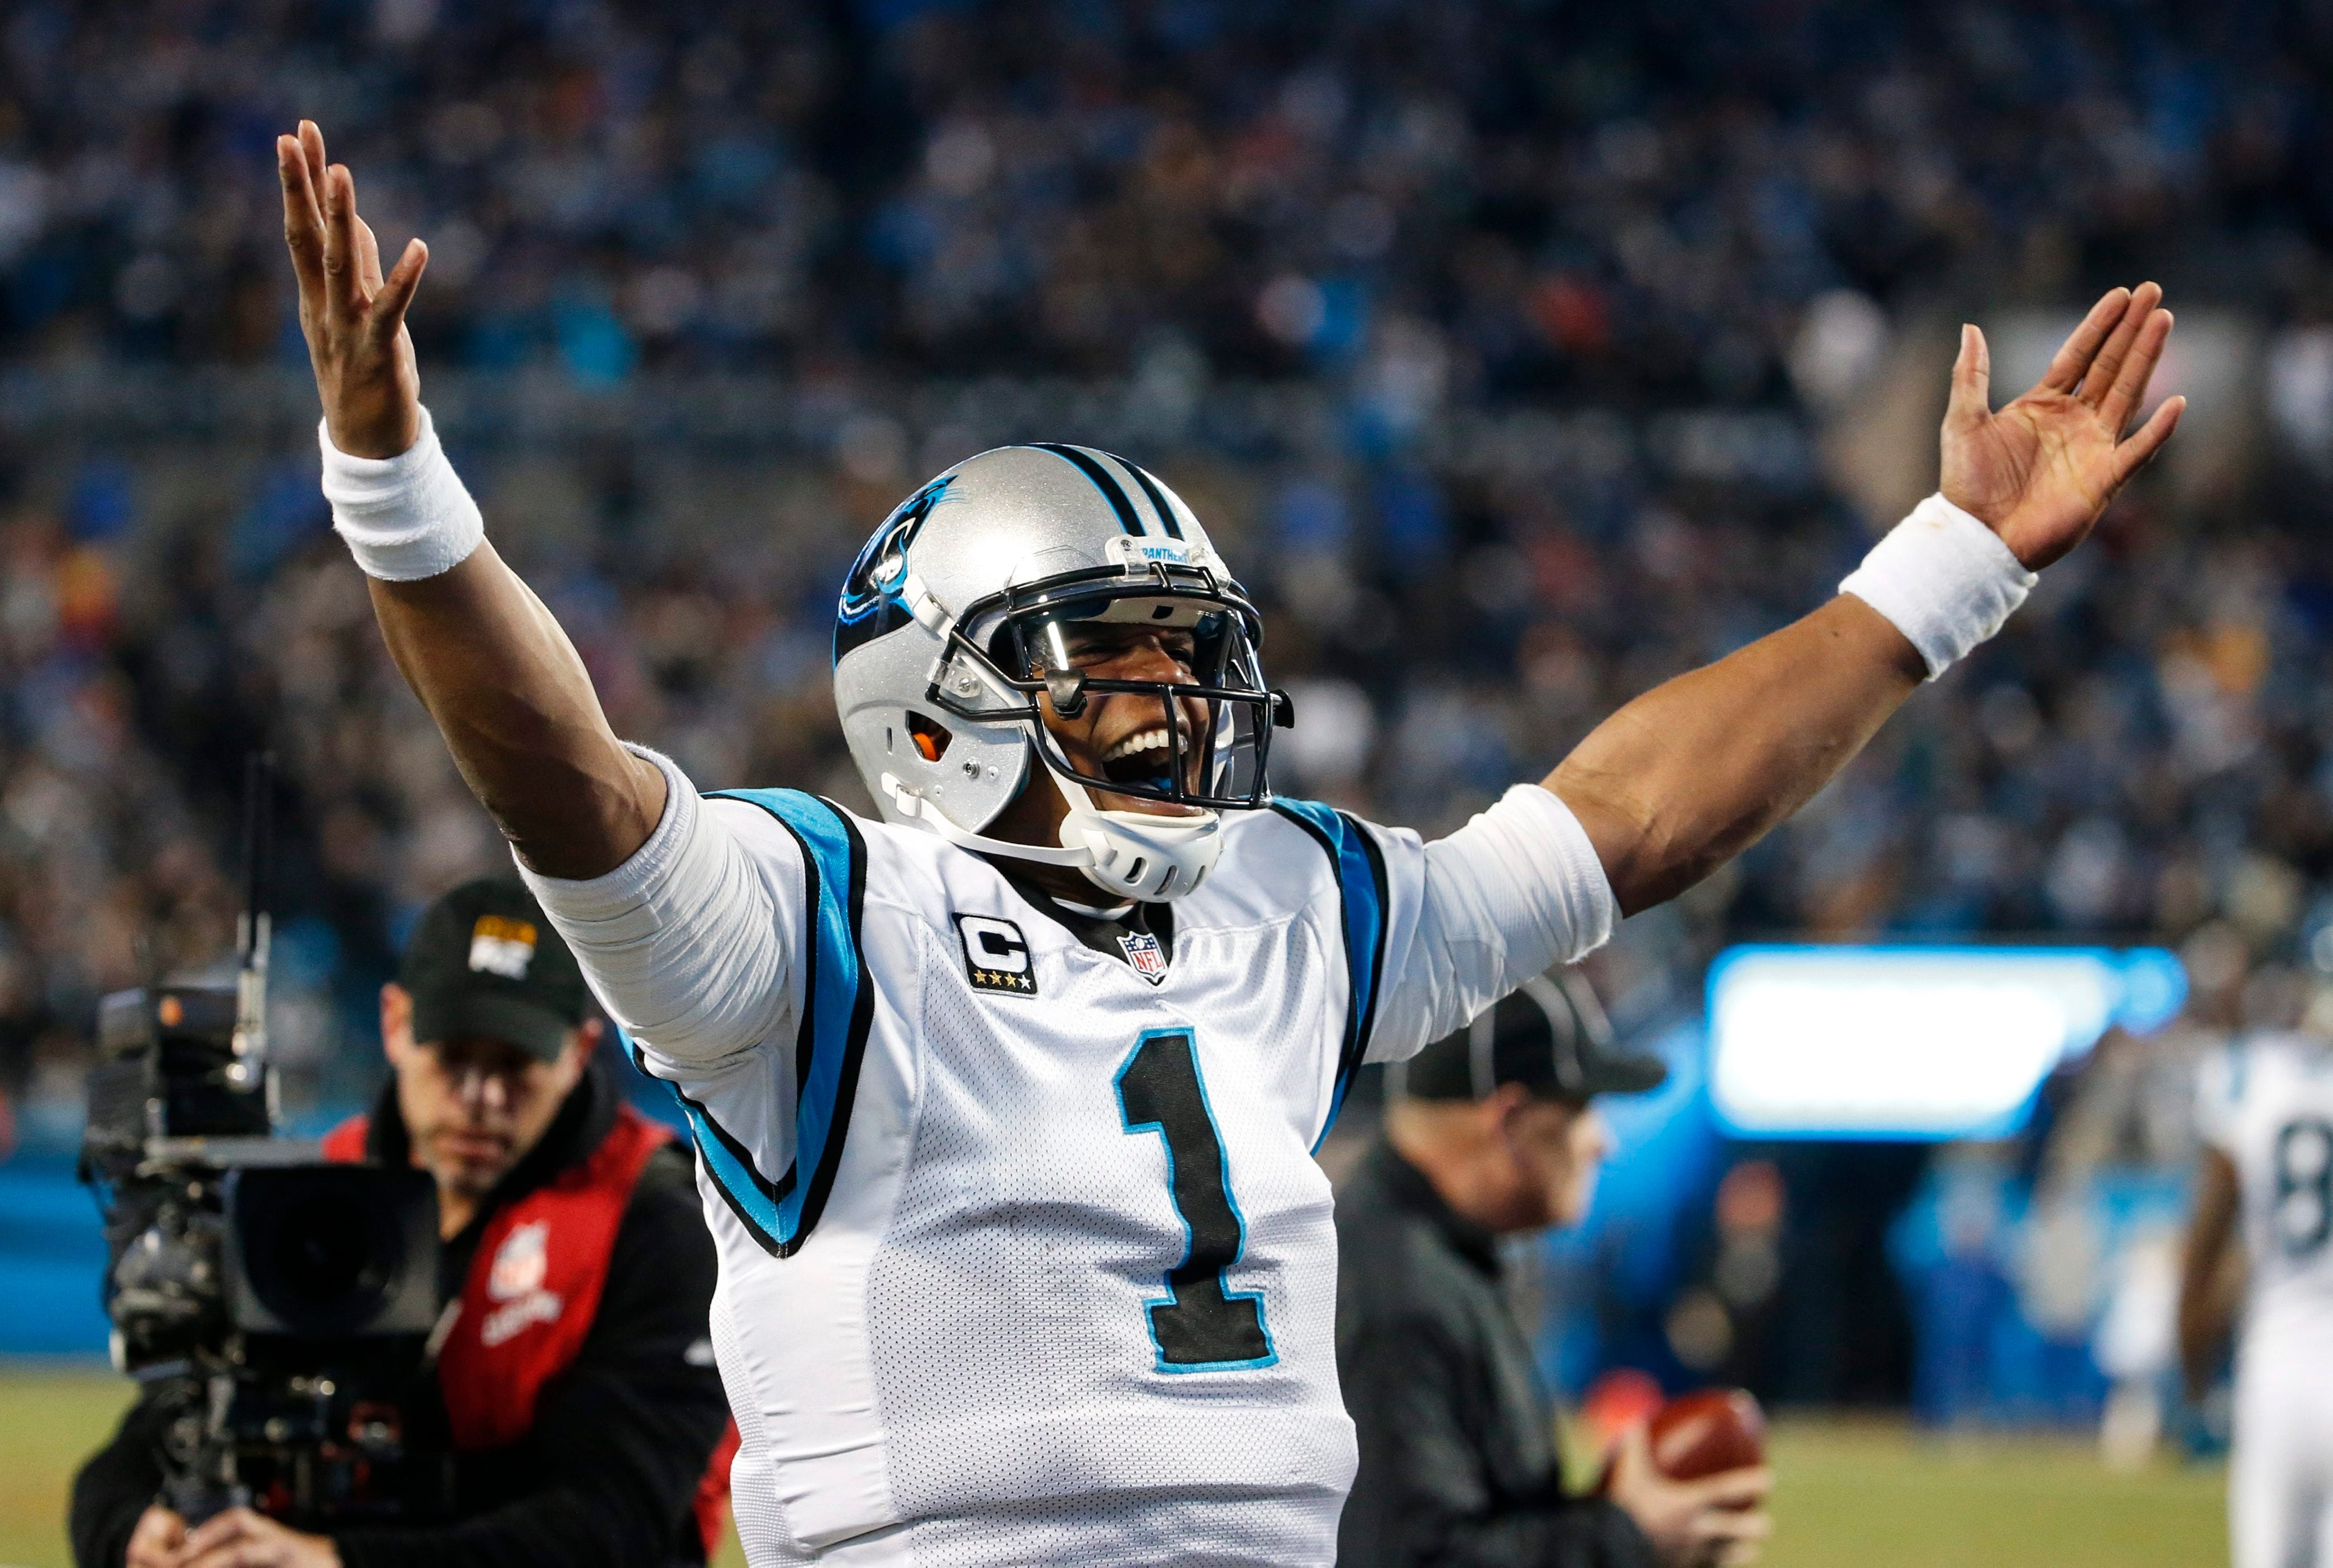 CBS Sports is streaming Super Bowl 50 for free 9news